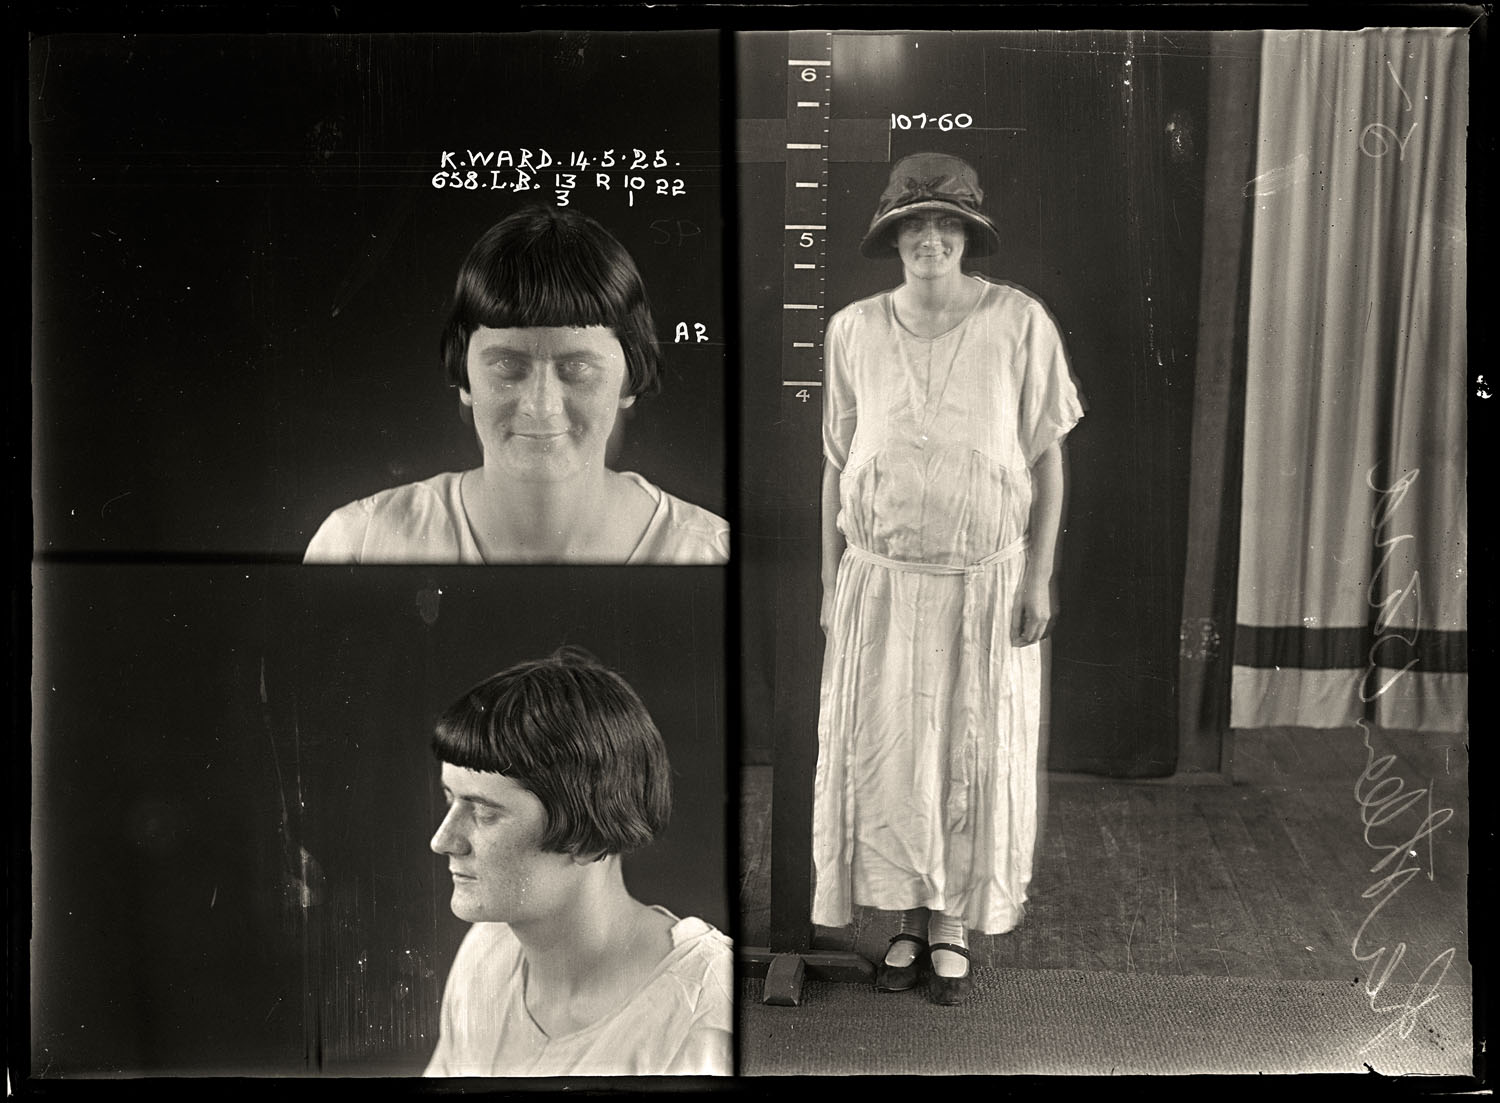 Kathleen Ward, criminal record number 658LB, 14 May 1925. State Reformatory for Women, Long Bay.